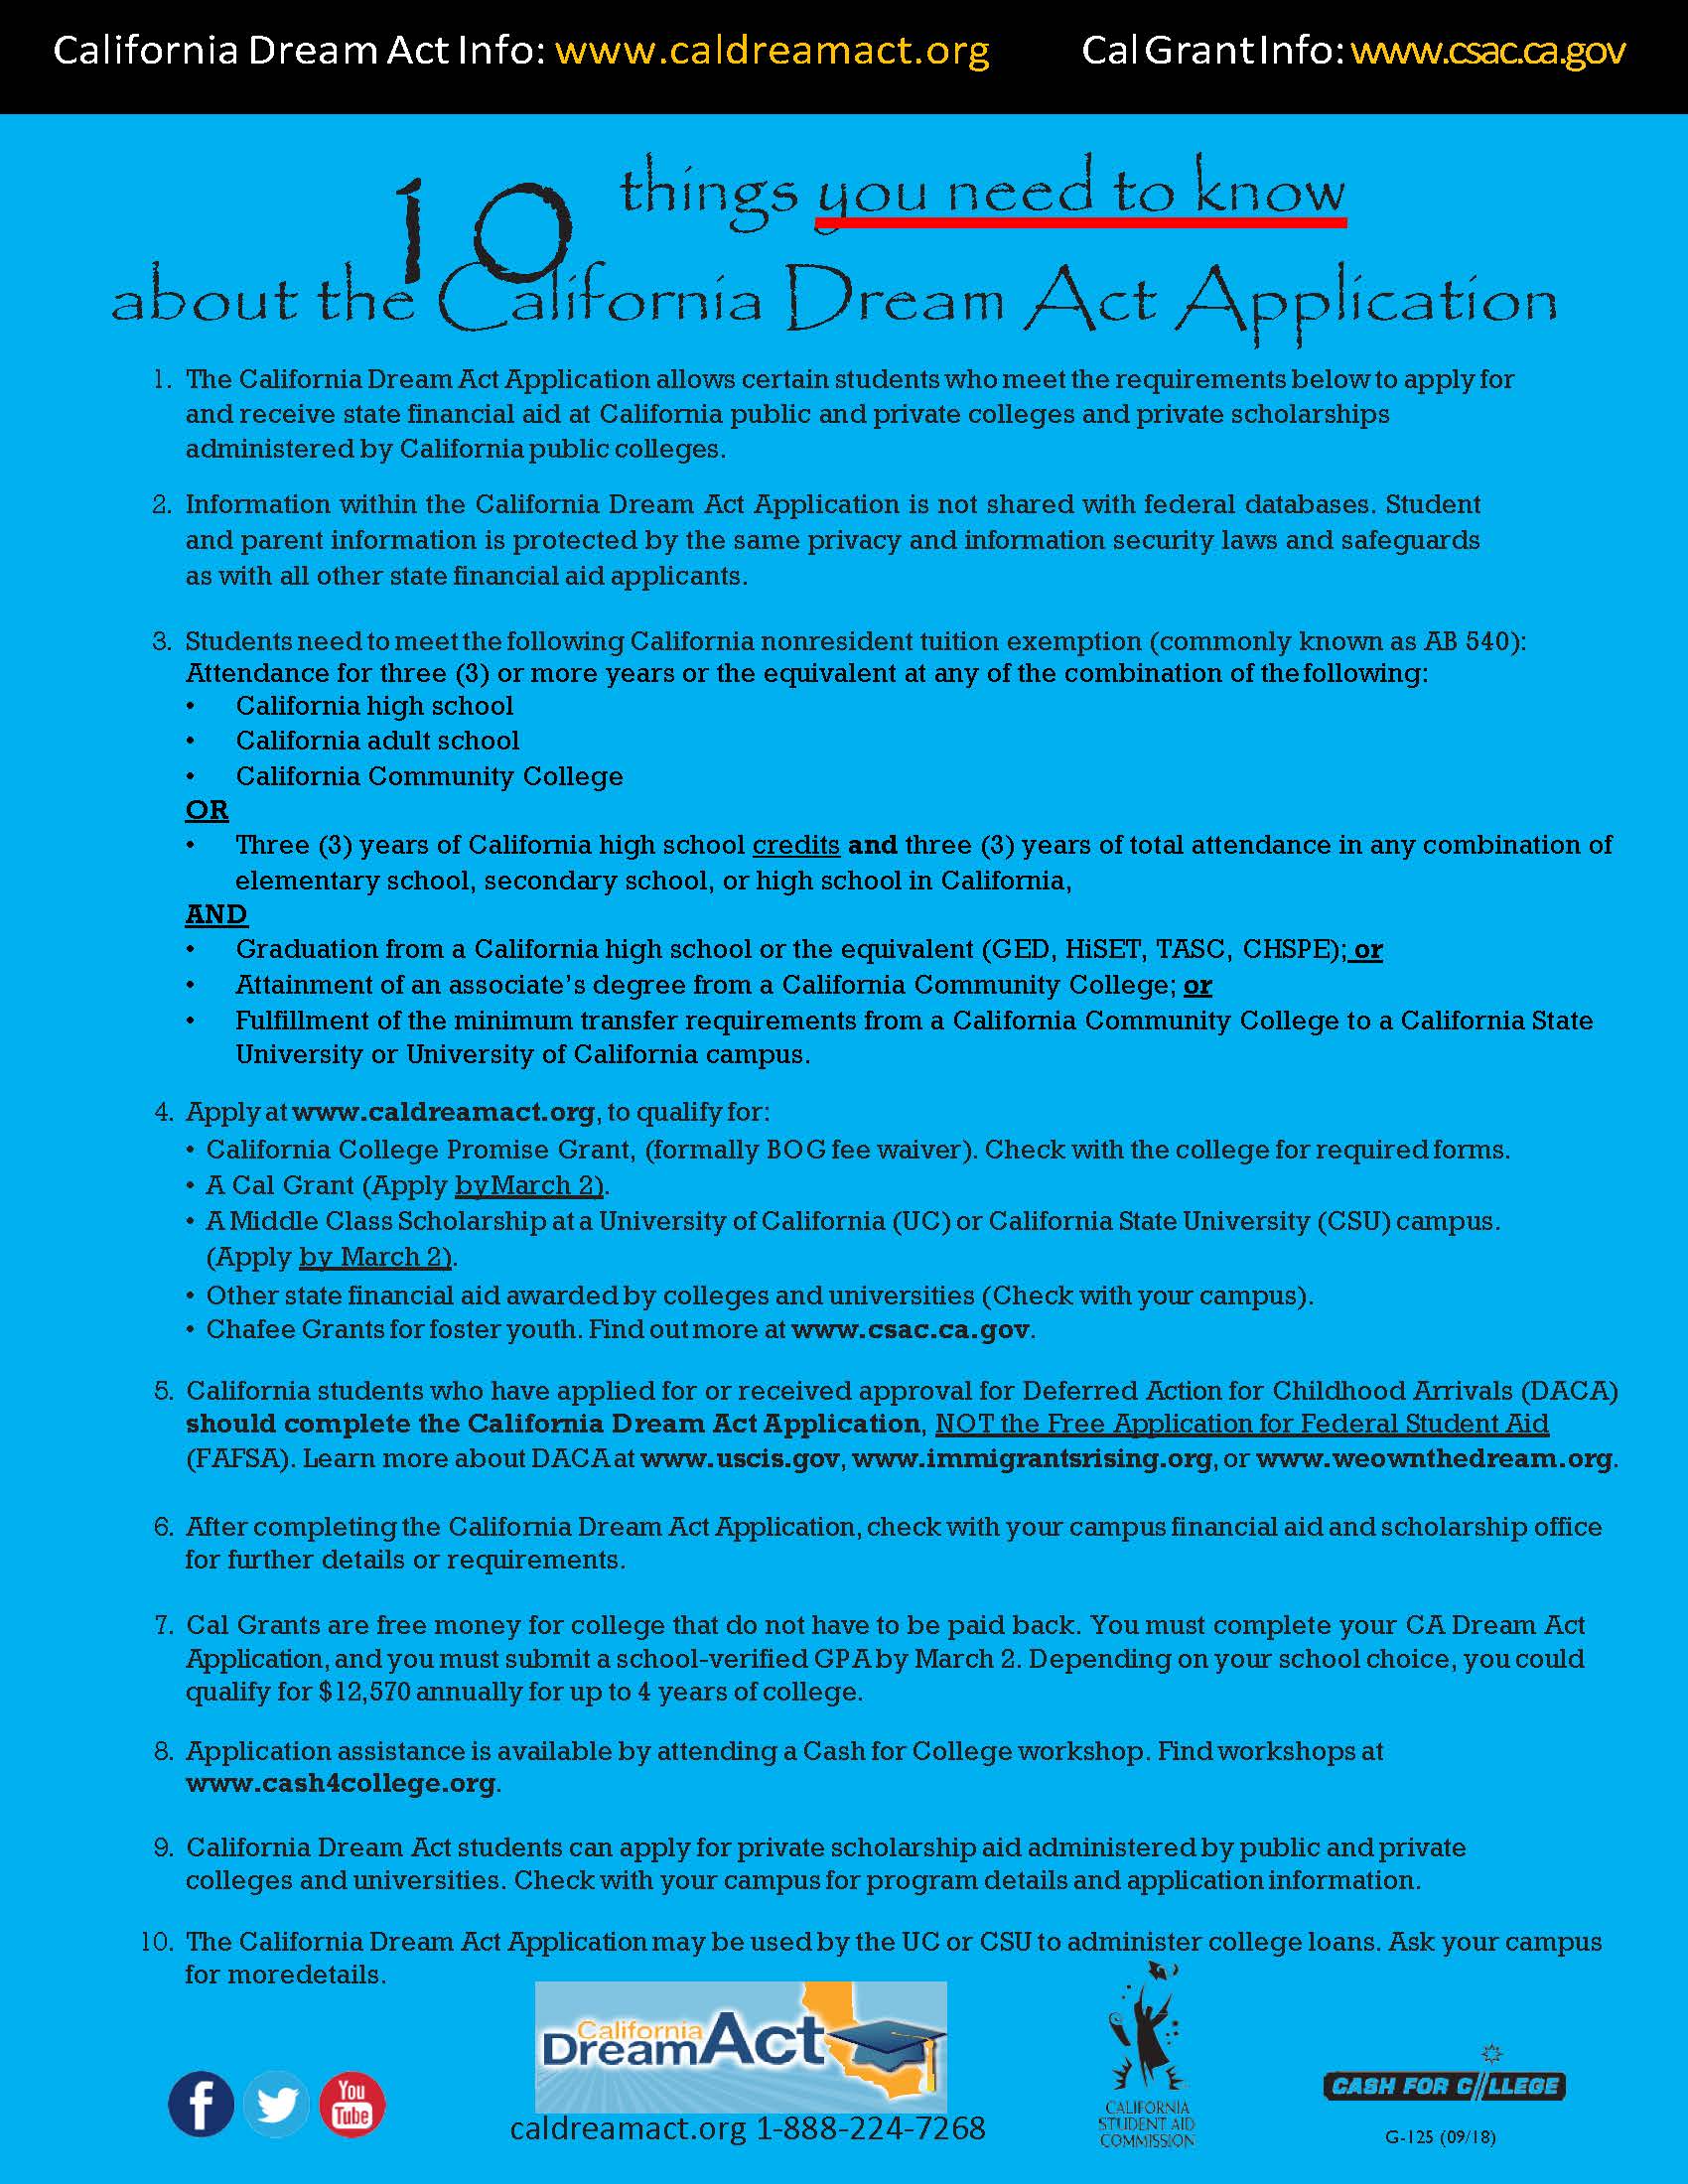 CA Dream ACT application process graphic